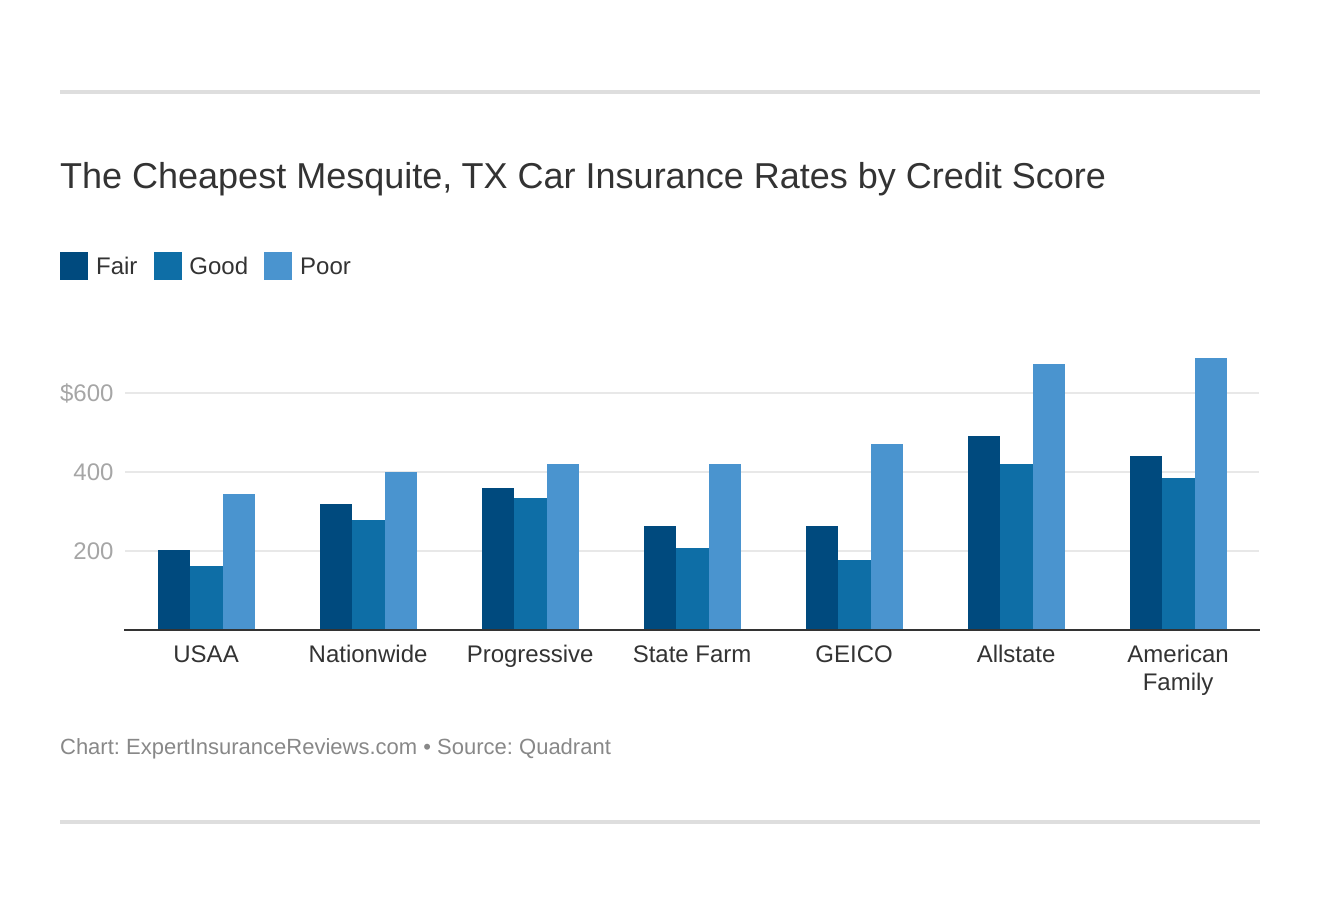 The Cheapest Mesquite, TX Car Insurance Rates by Credit Score